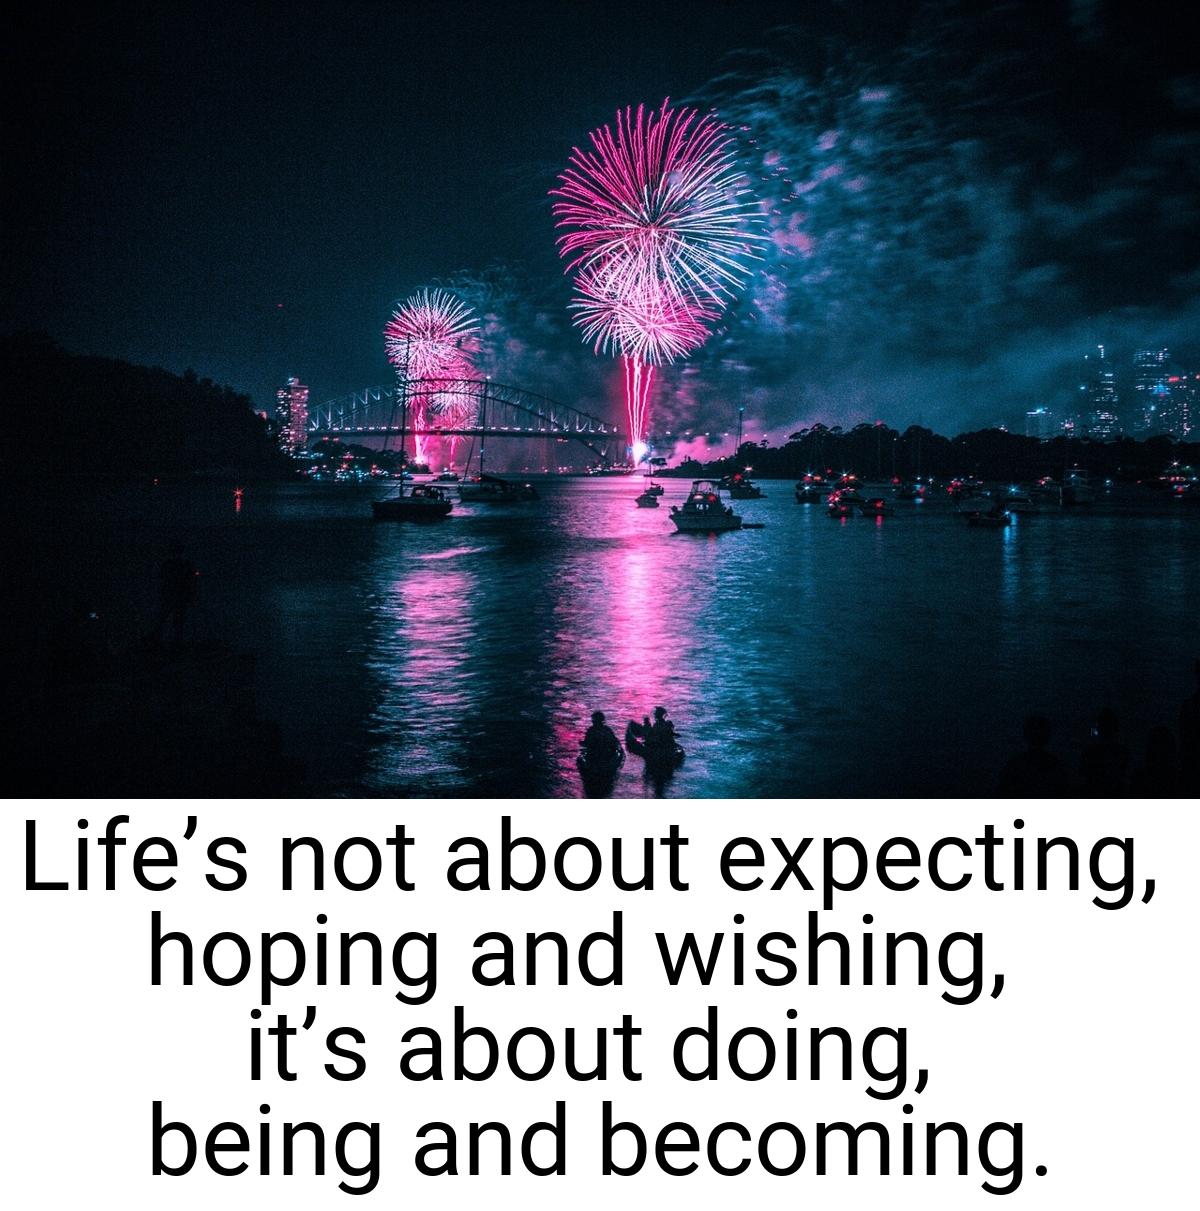 Life’s not about expecting, hoping and wishing, it’s about